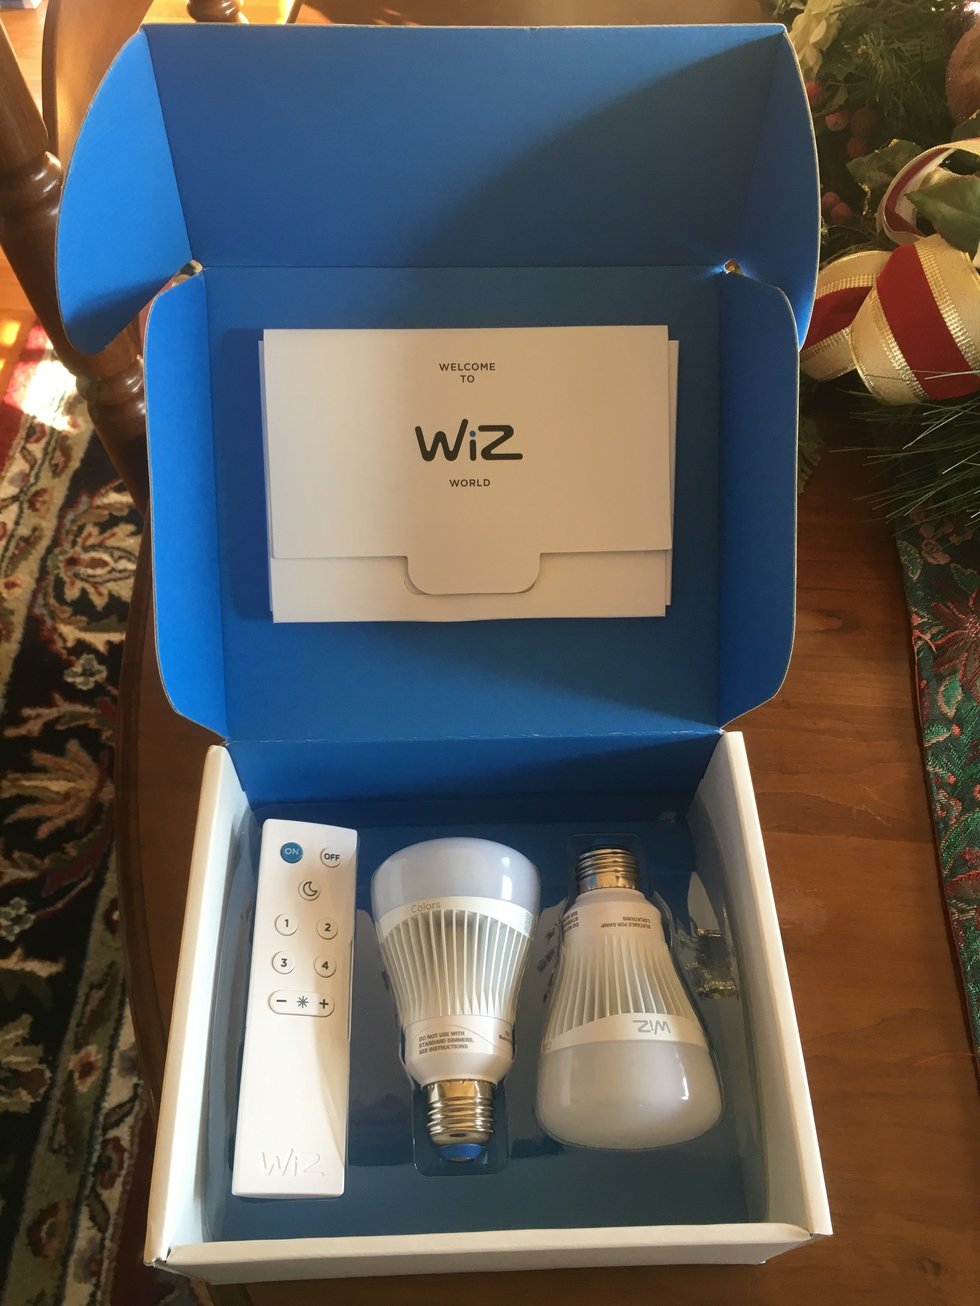 Unboxing Wiz Wi-Fi Smart Lights with Remote Control